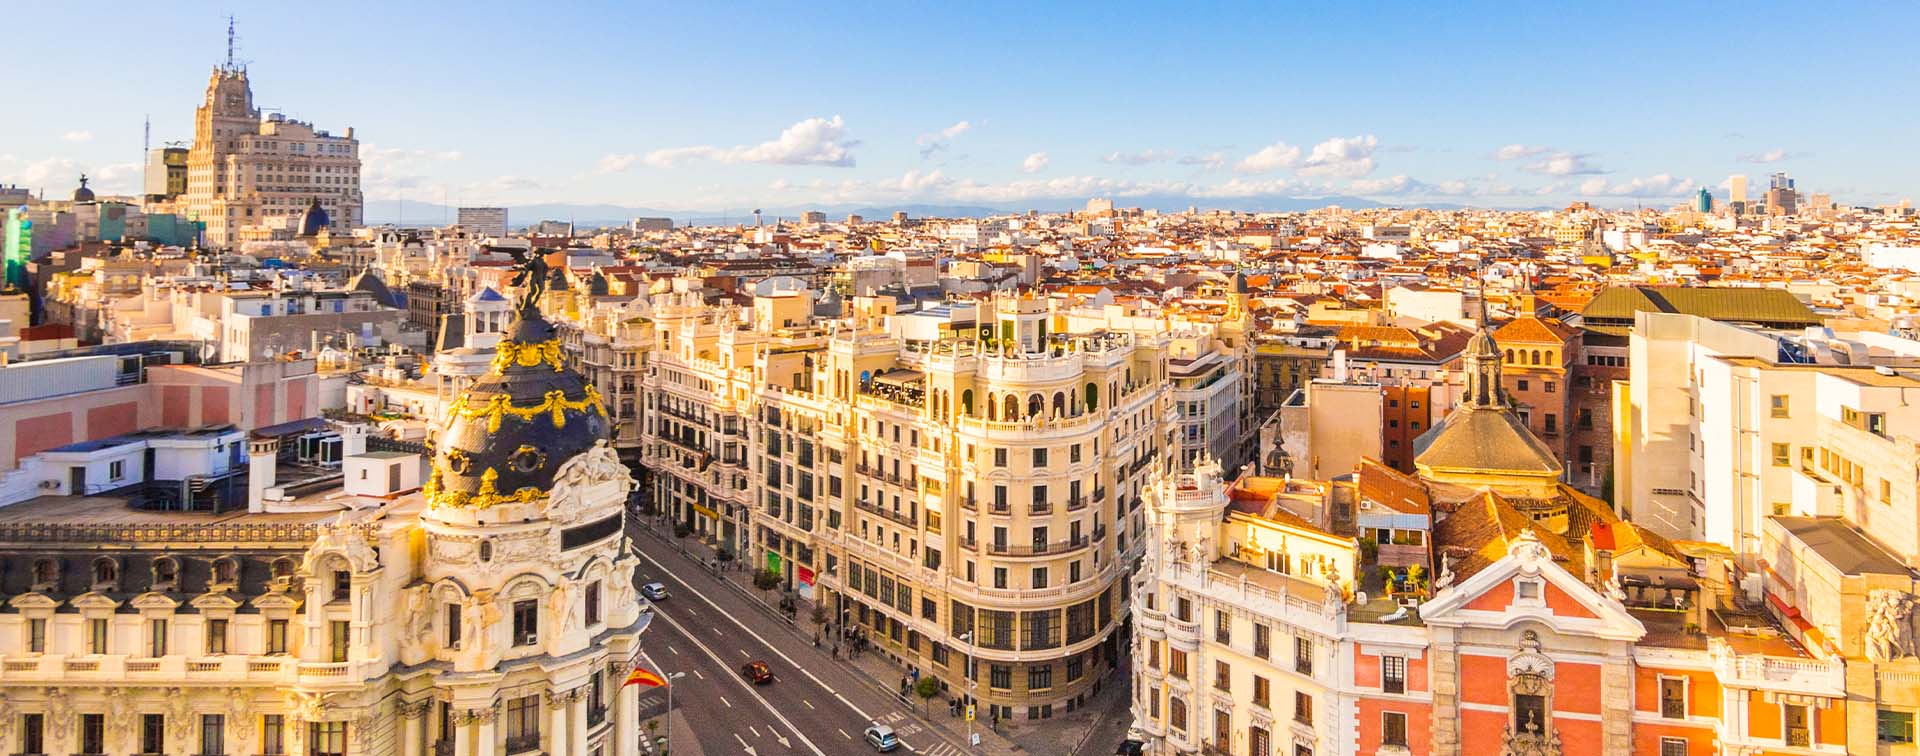 Aerial view of Calle de Alcalà in Madrid, Spain